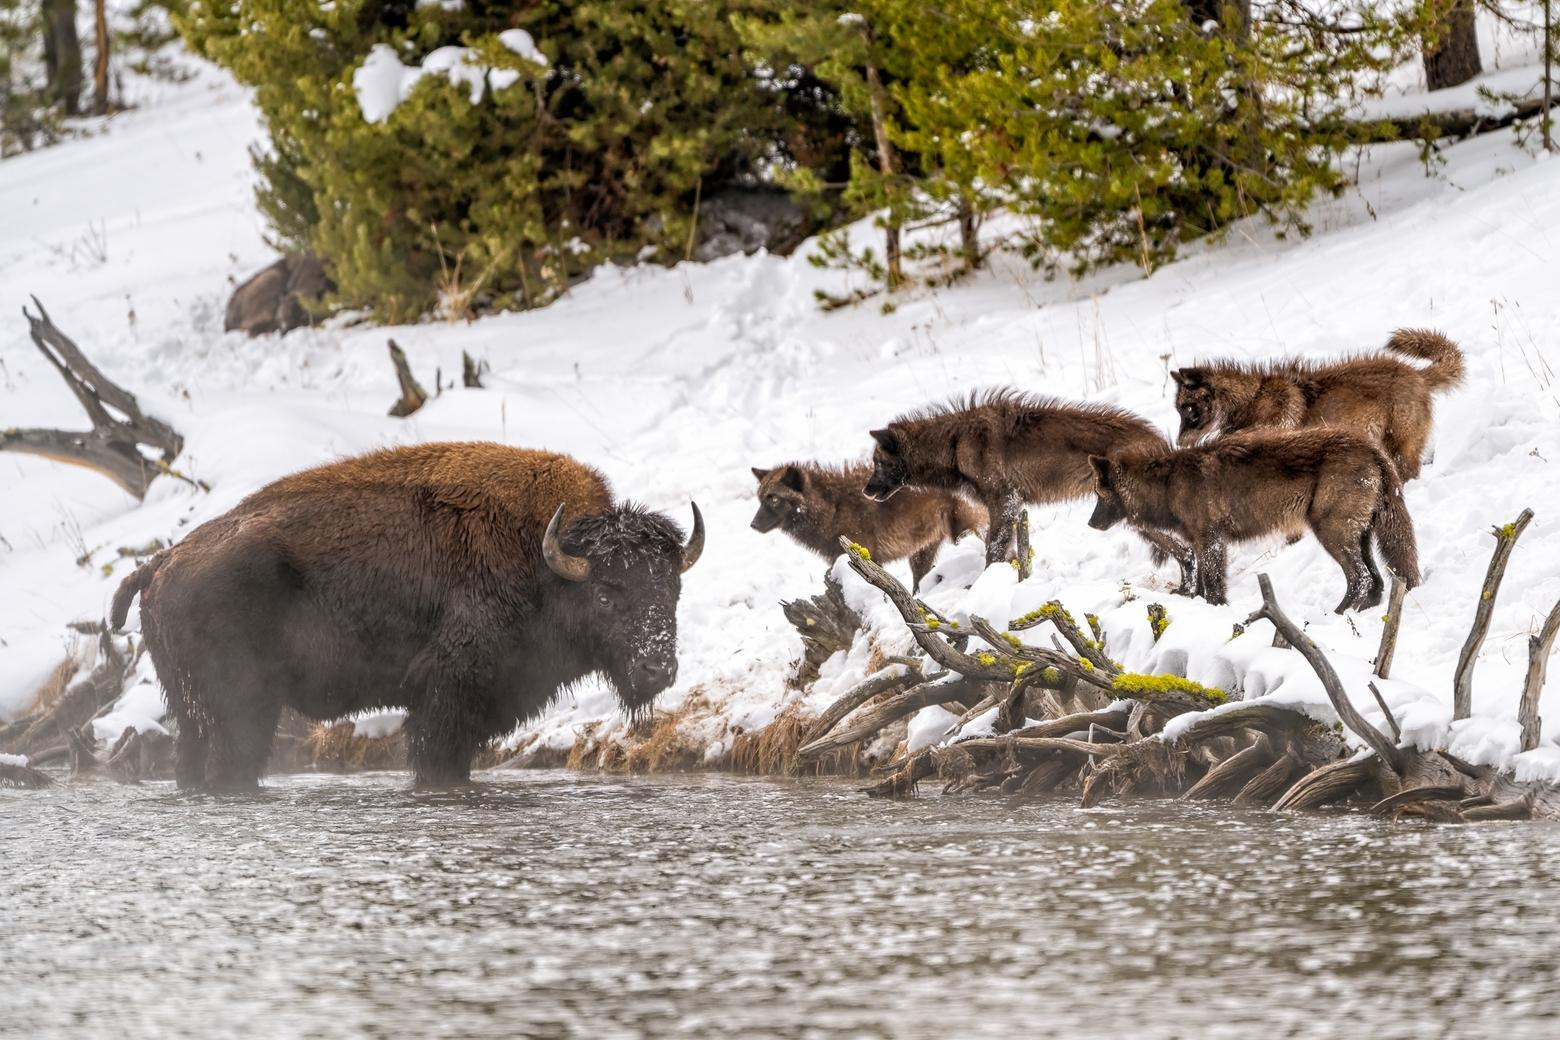 January 20. Early in the day, the bison would enter the river for protection from the wolves. He was safe in the water where they would not venture.